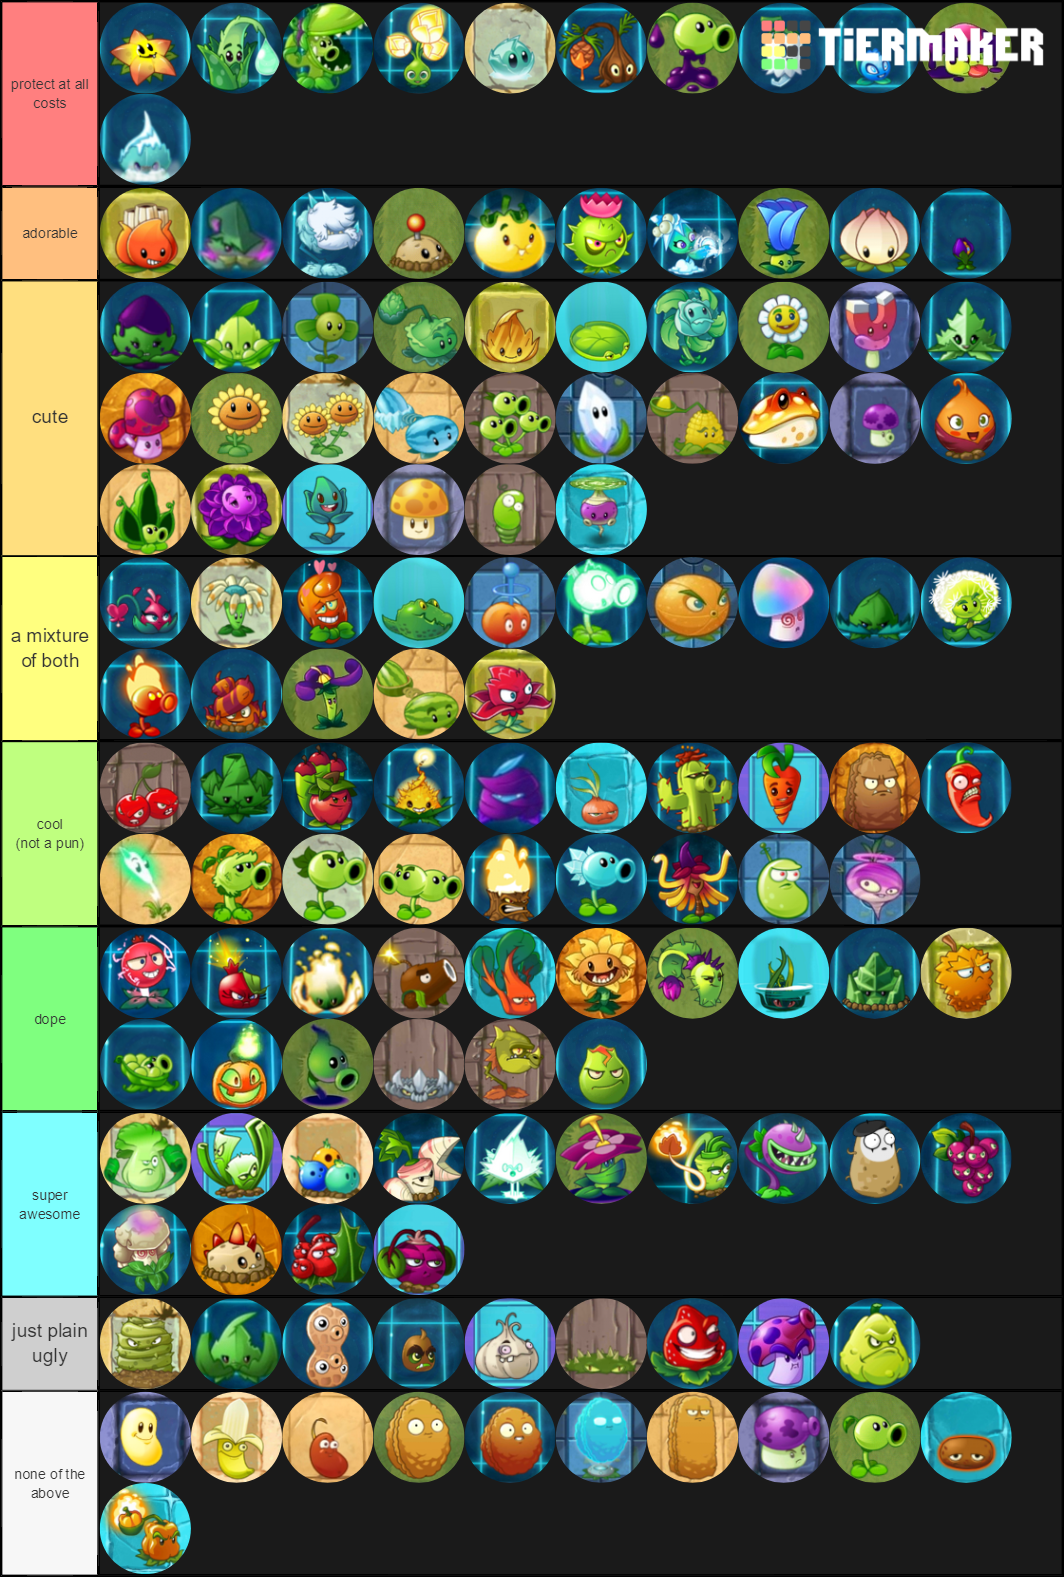 Appearance Cuteness Coolness Tier List Fandom - petition roblox no more censorship change org